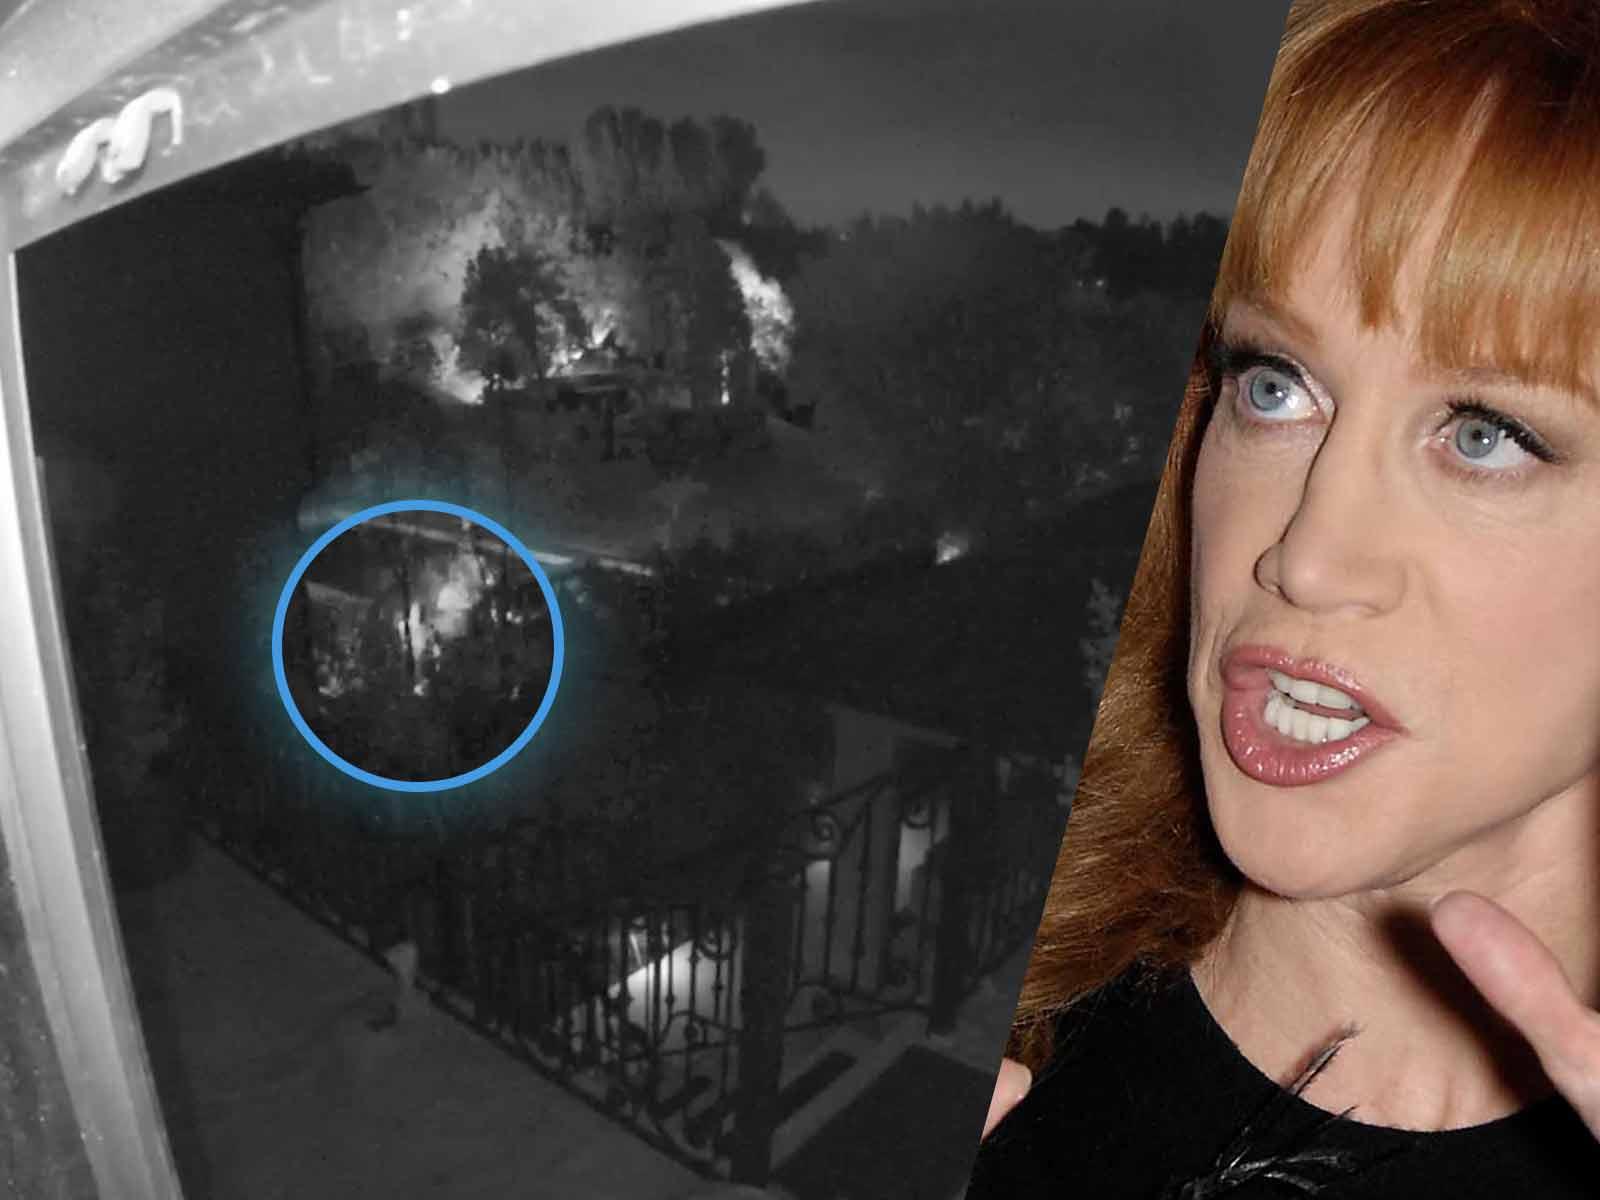 Kathy Griffin’s Neighbor Calls Her a ‘Stupid Bitch’ in Newly Released Video